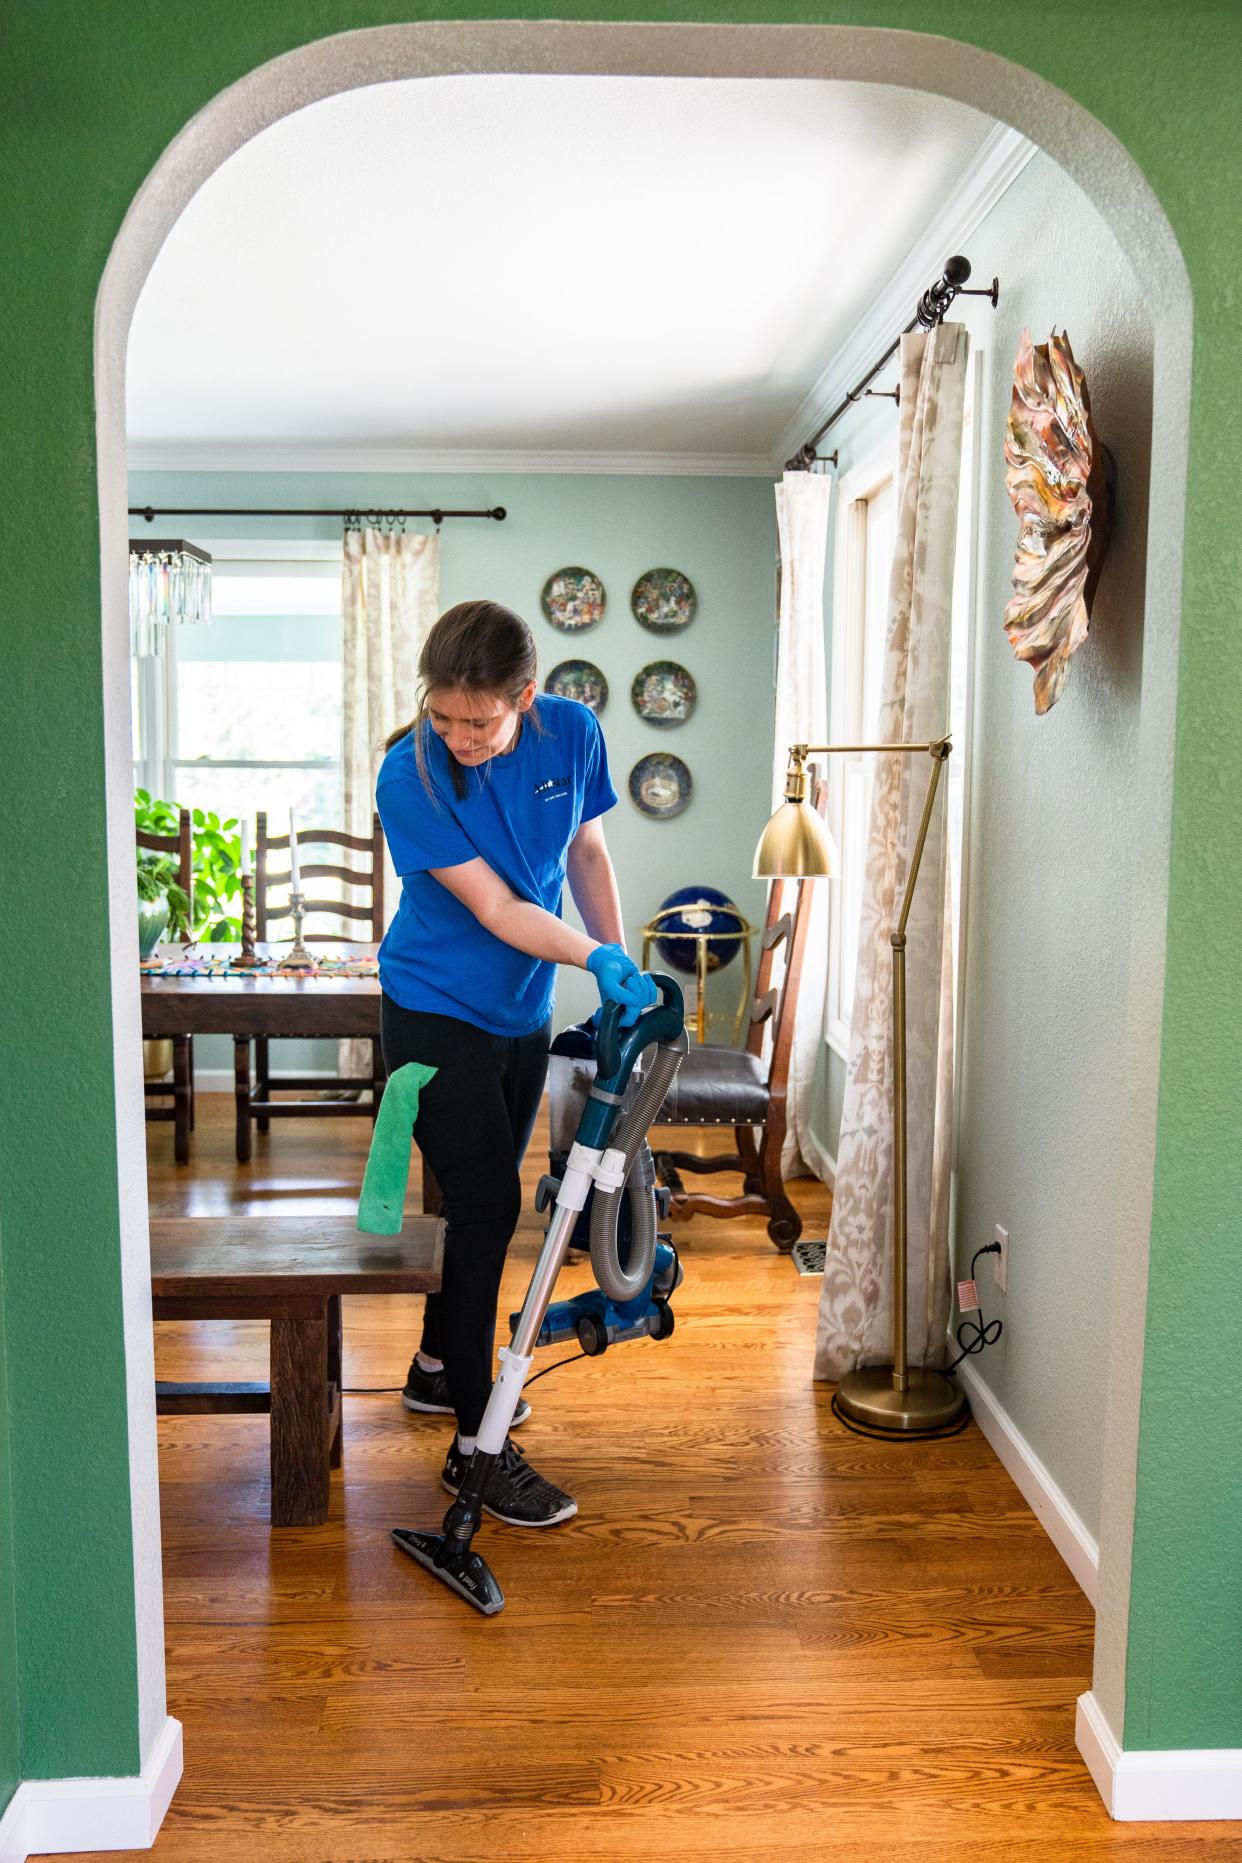 All Star Cleaning Services' Chrysten Svedarsky vacuums in the Fort Collins home of its founder, Laura Christian, on Tuesday.